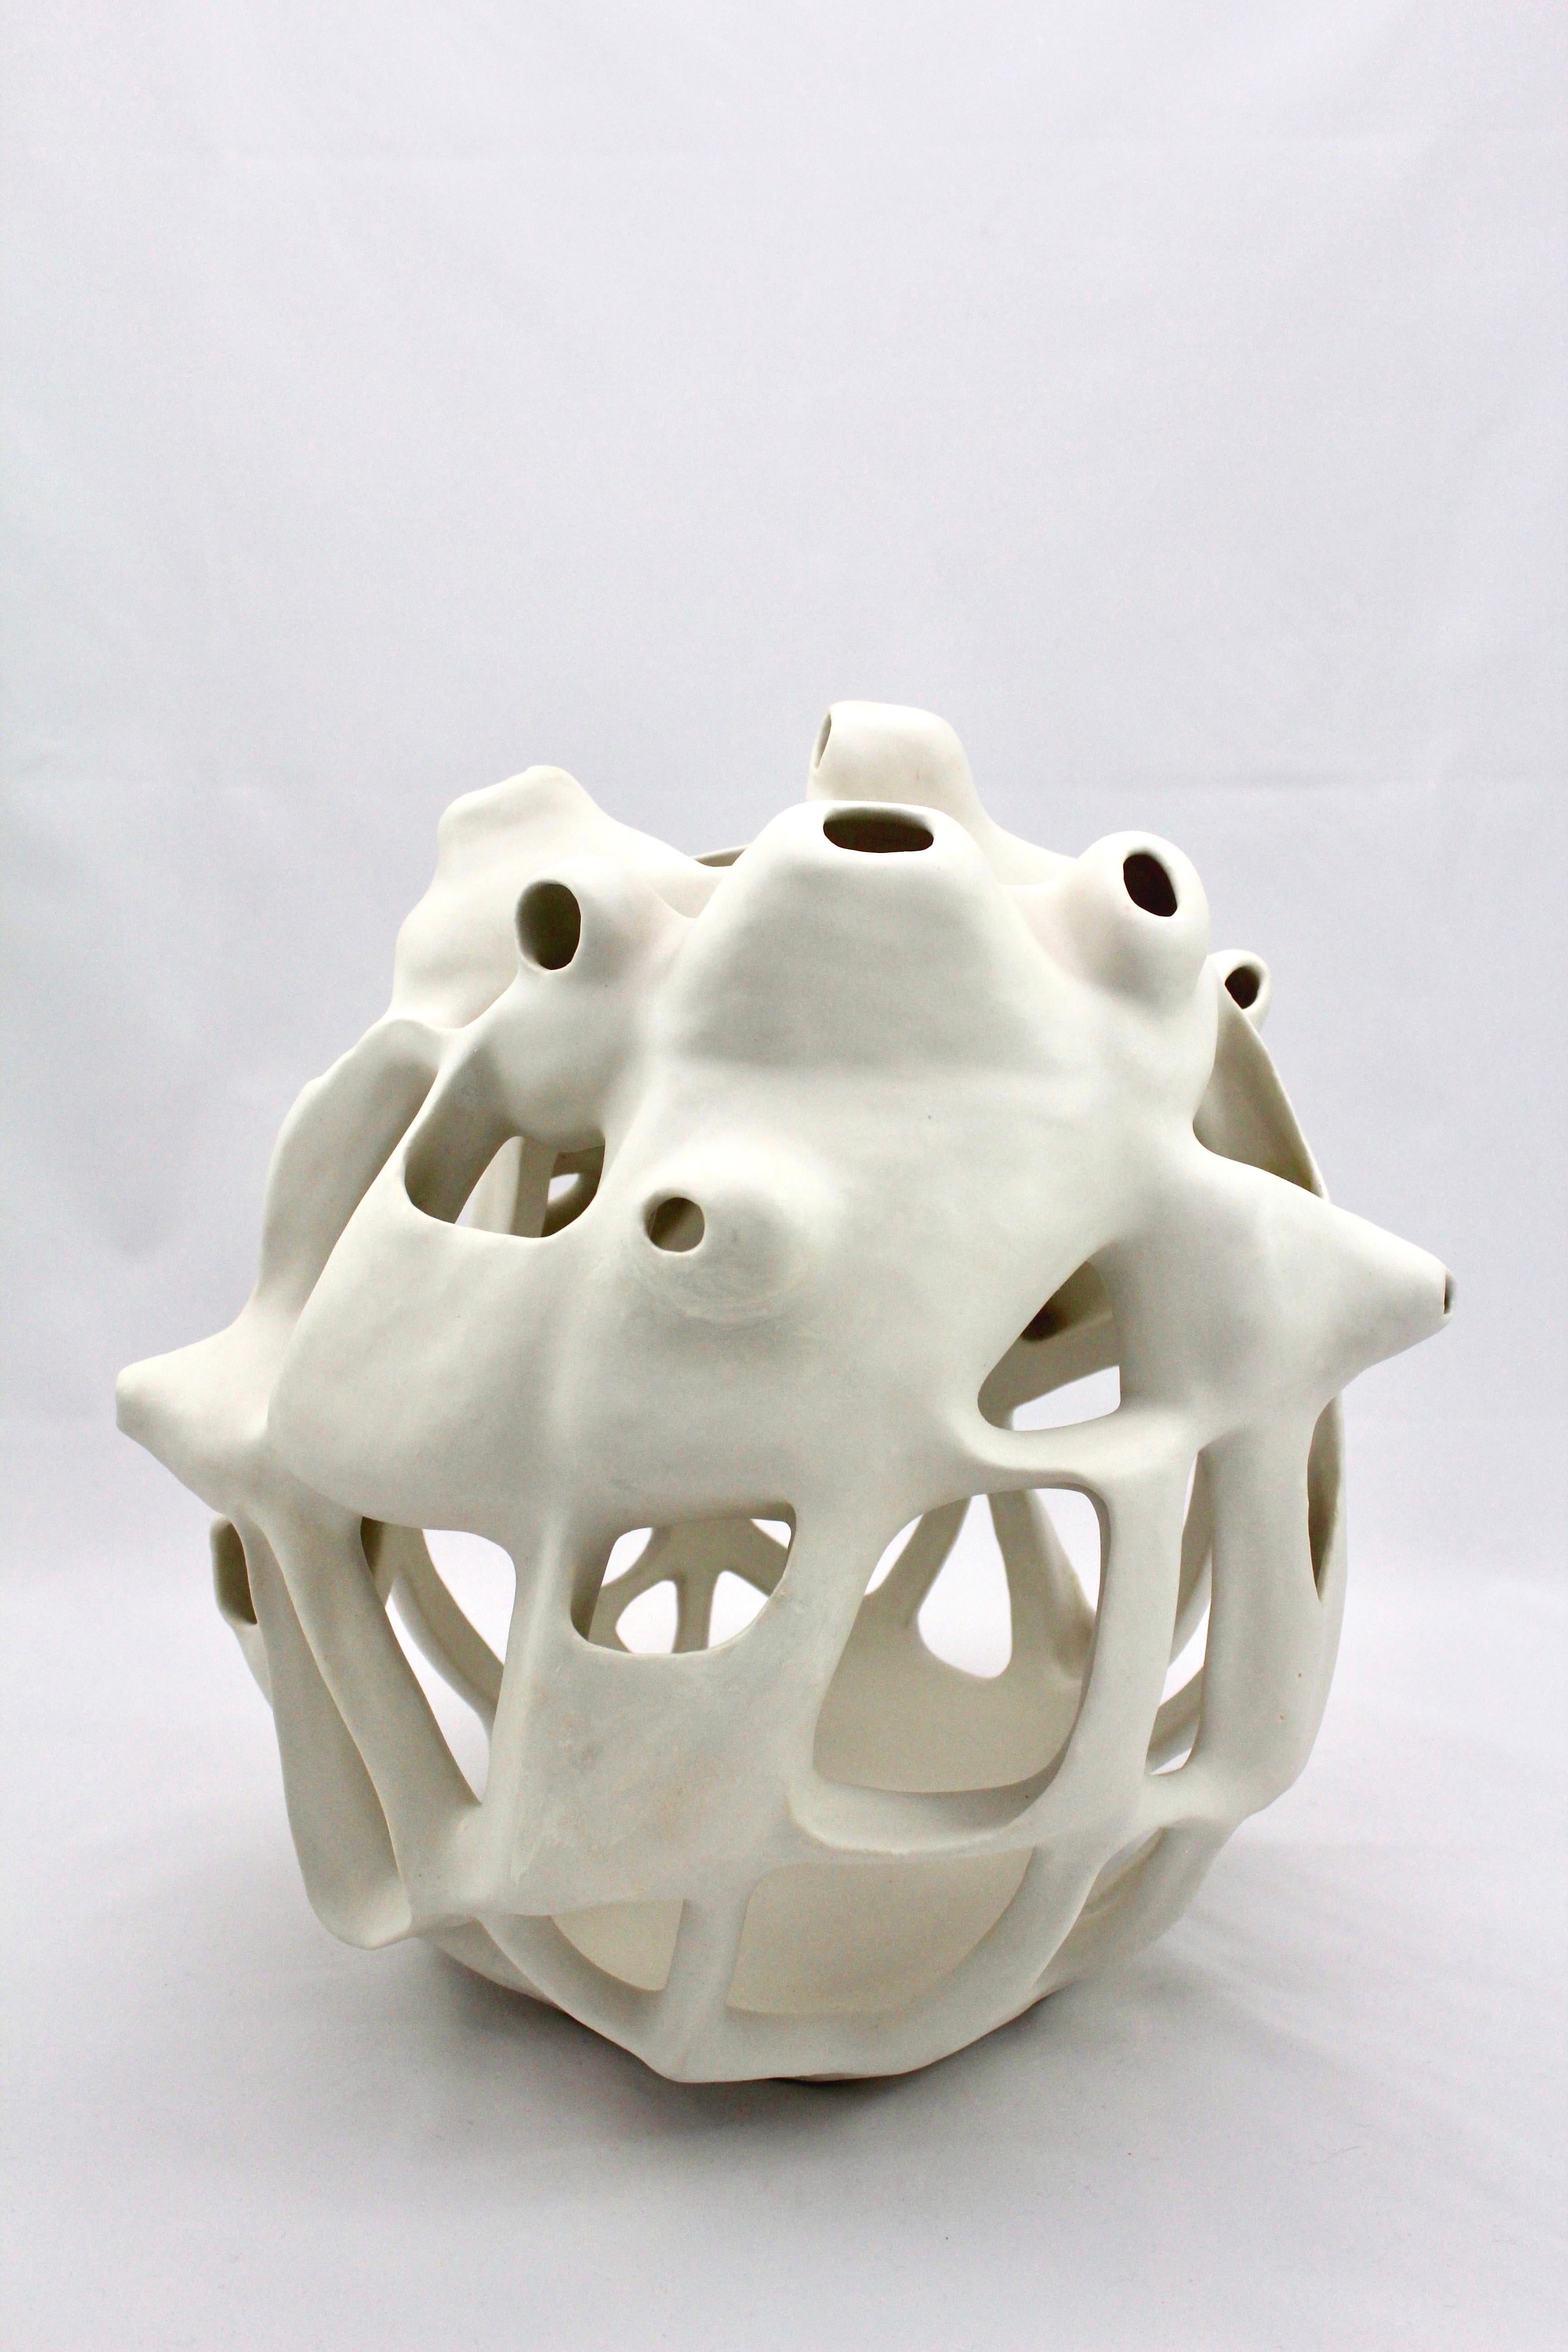 Joan Lurie Abstract Sculpture - Untitled #2 - abstract geometric, organic white glazed porcelain sculpture 